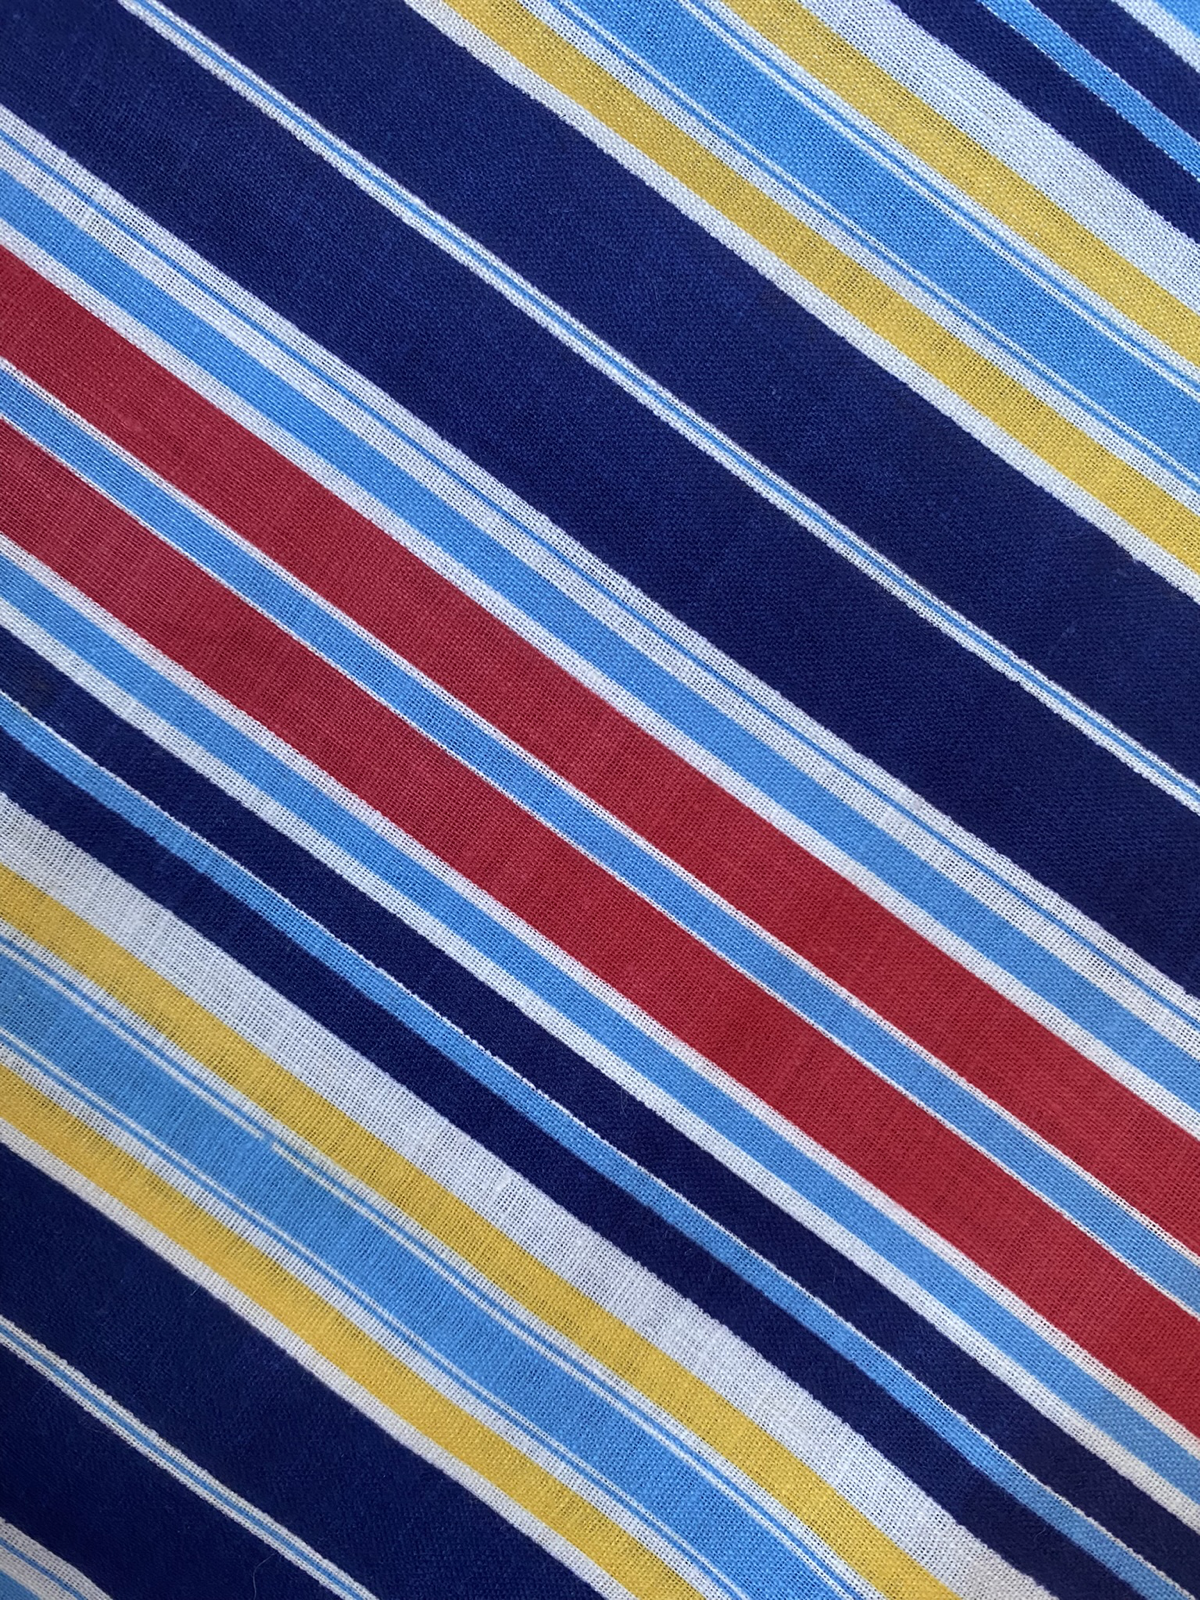 1930s-1940s Primary Colors Striped Fabric